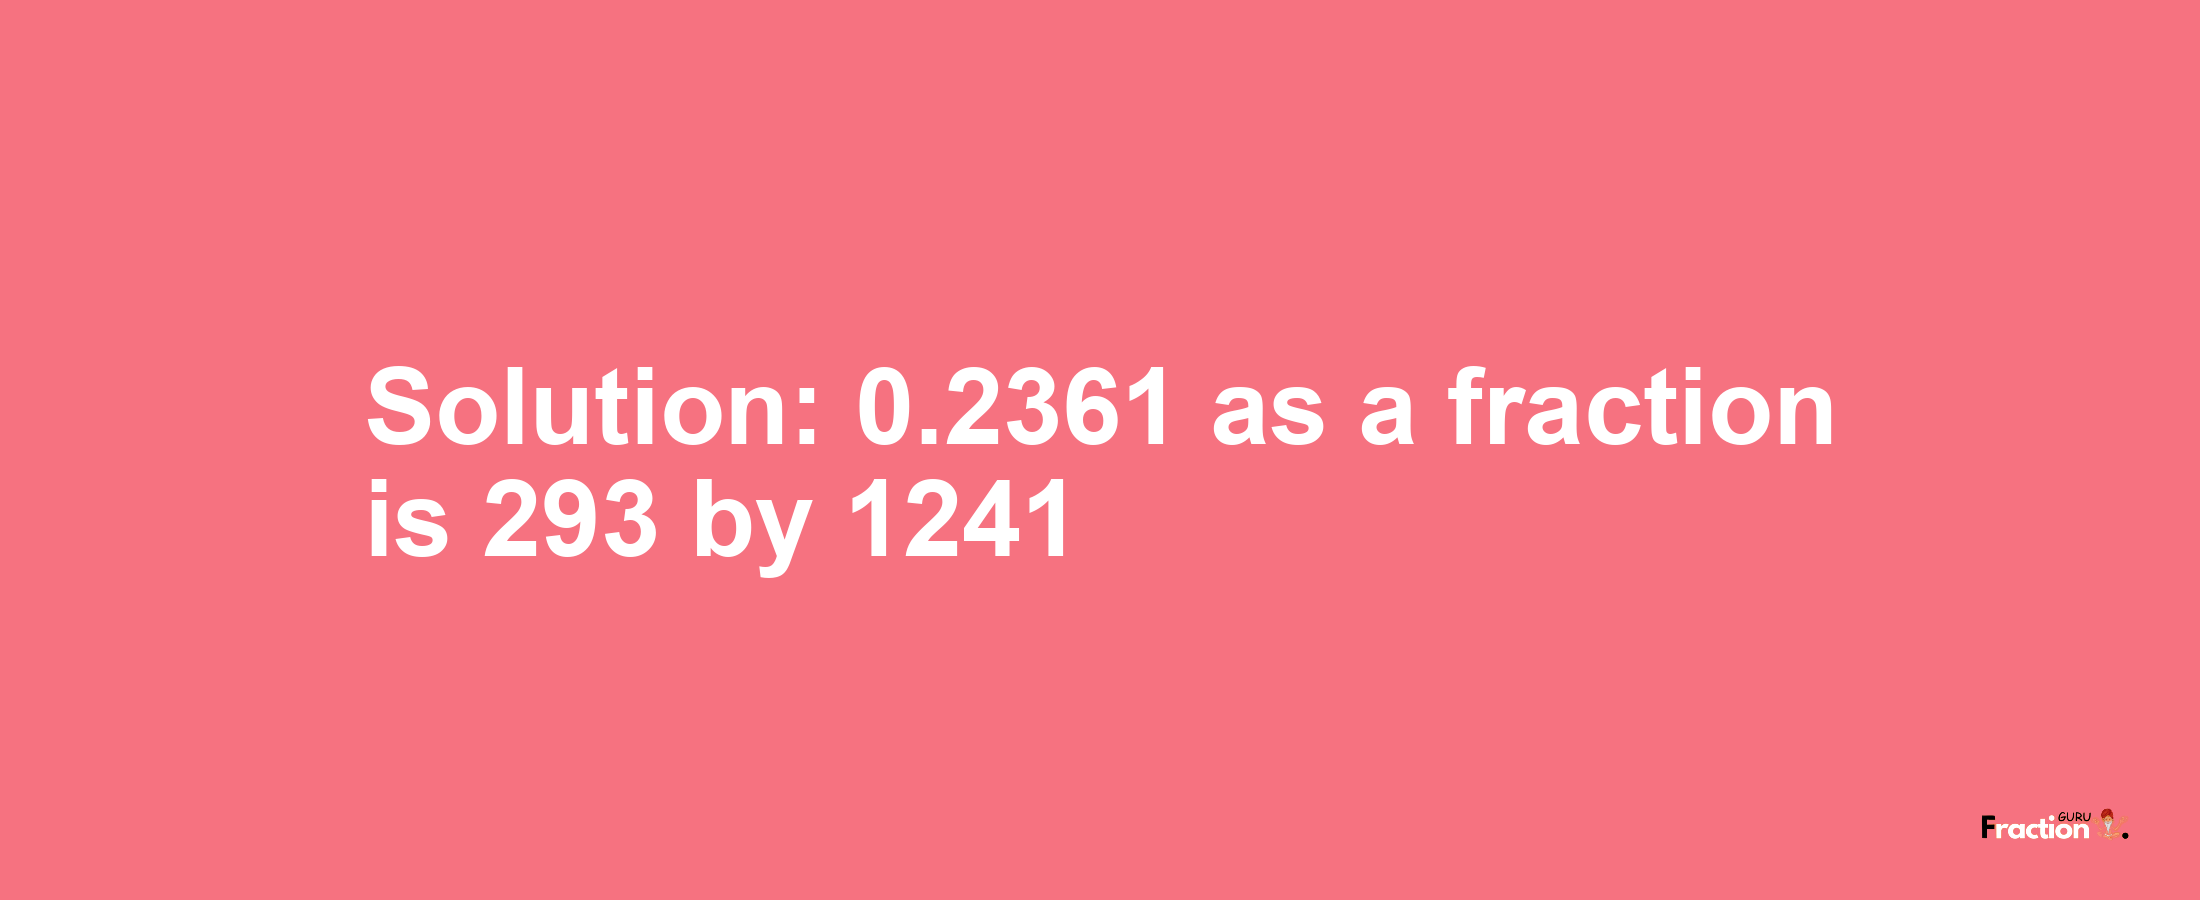 Solution:0.2361 as a fraction is 293/1241